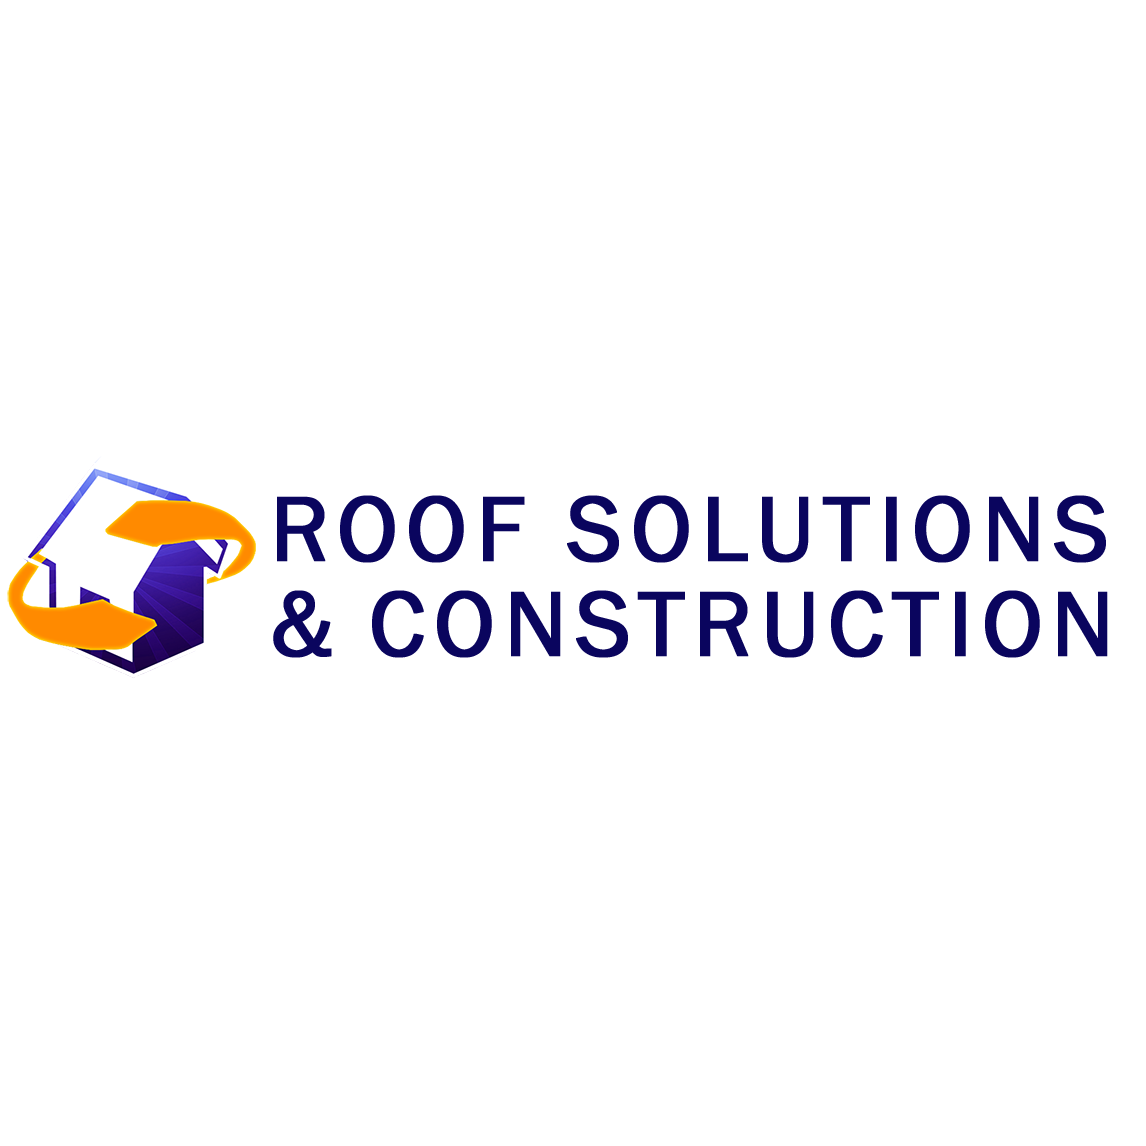 Roof Solutions & Construction Logo